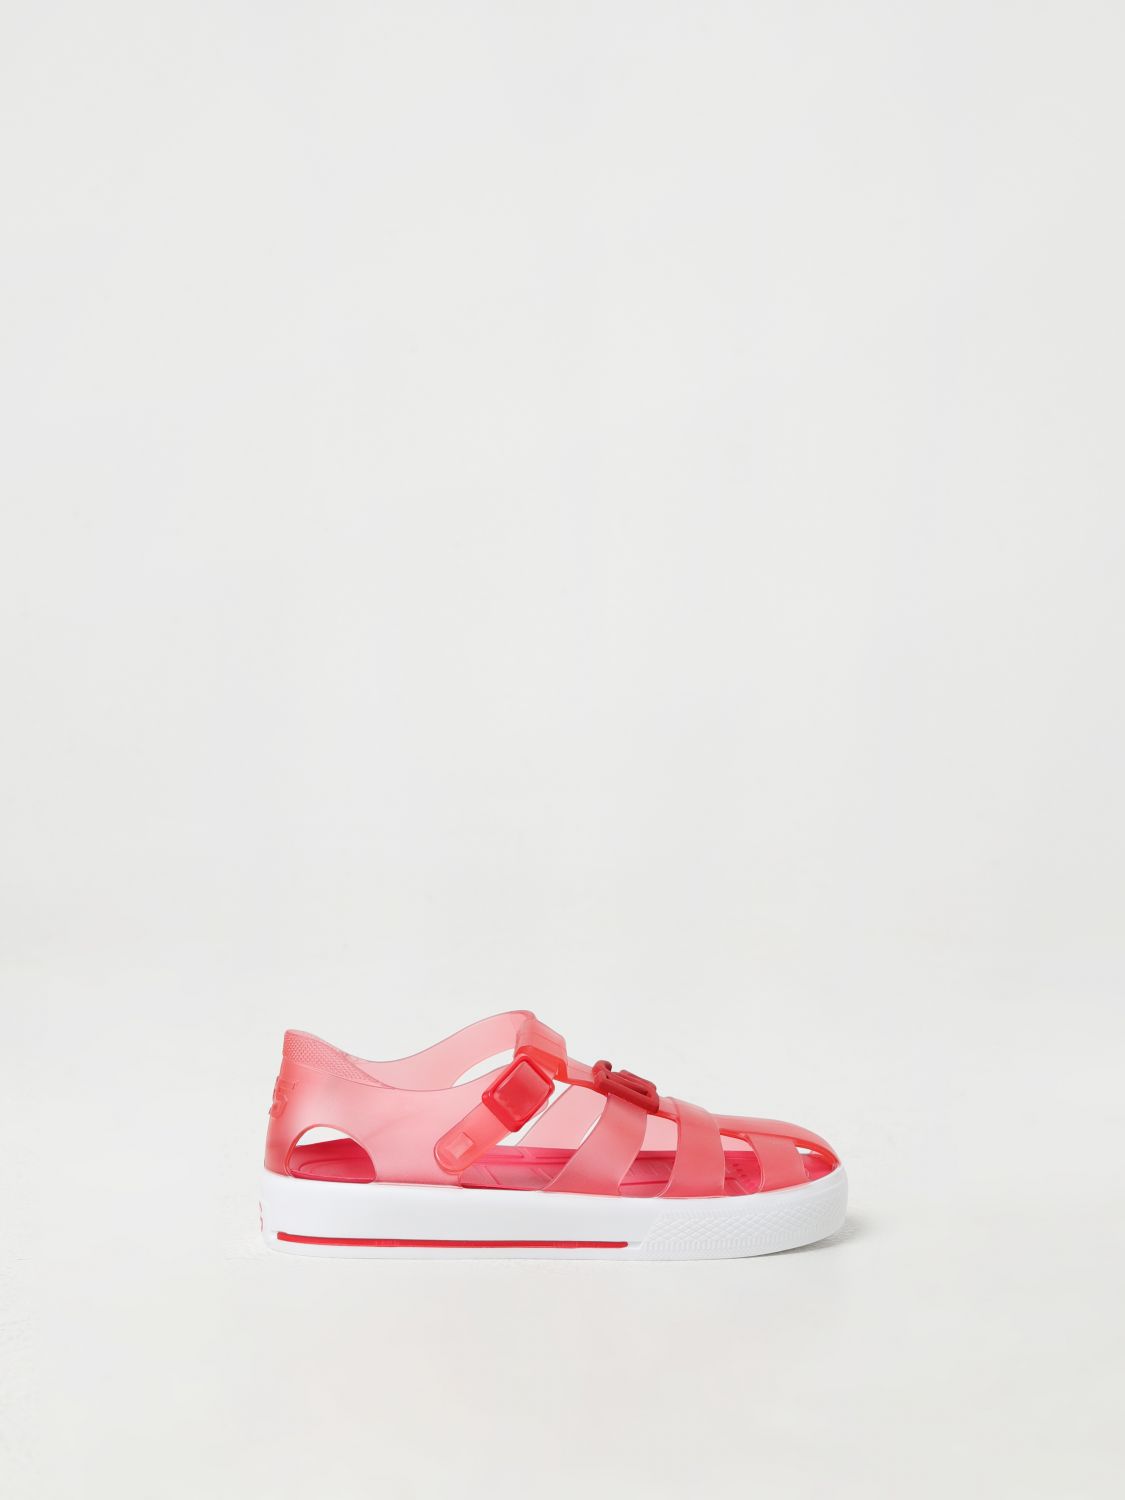 Dolce & Gabbana Shoes  Kids Colour Red